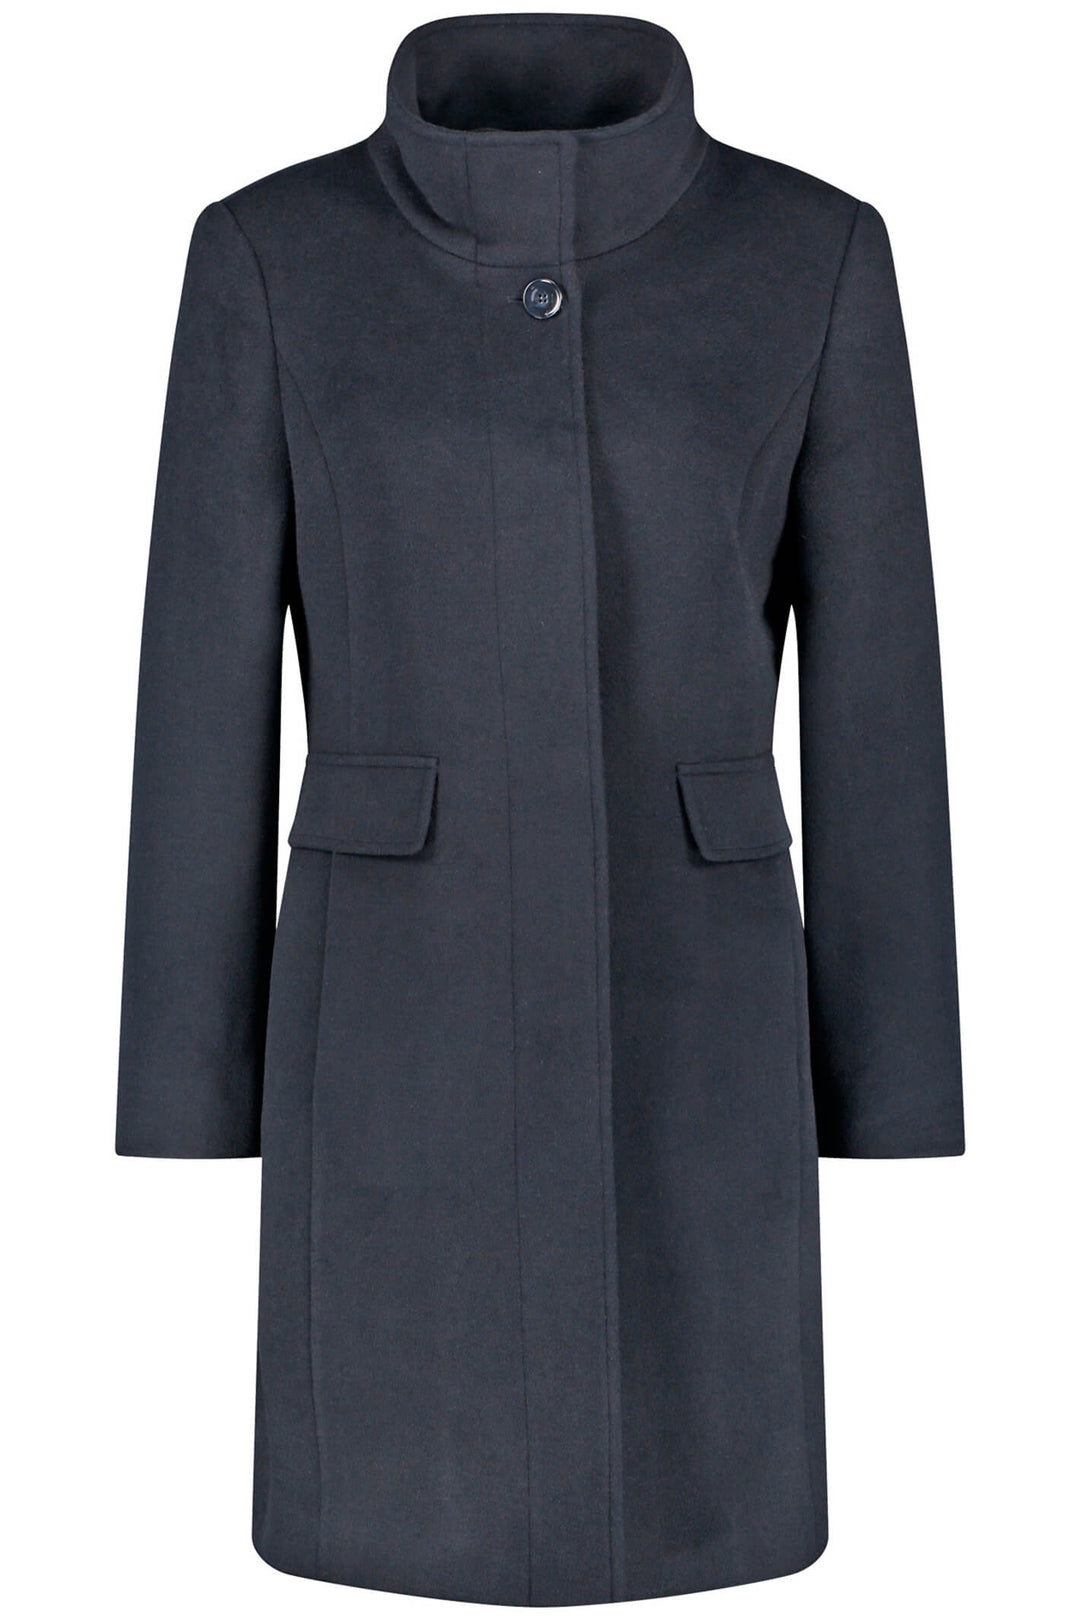 Gerry Weber 250235 Navy Wool Mix High Neck Coat - Experience Boutique